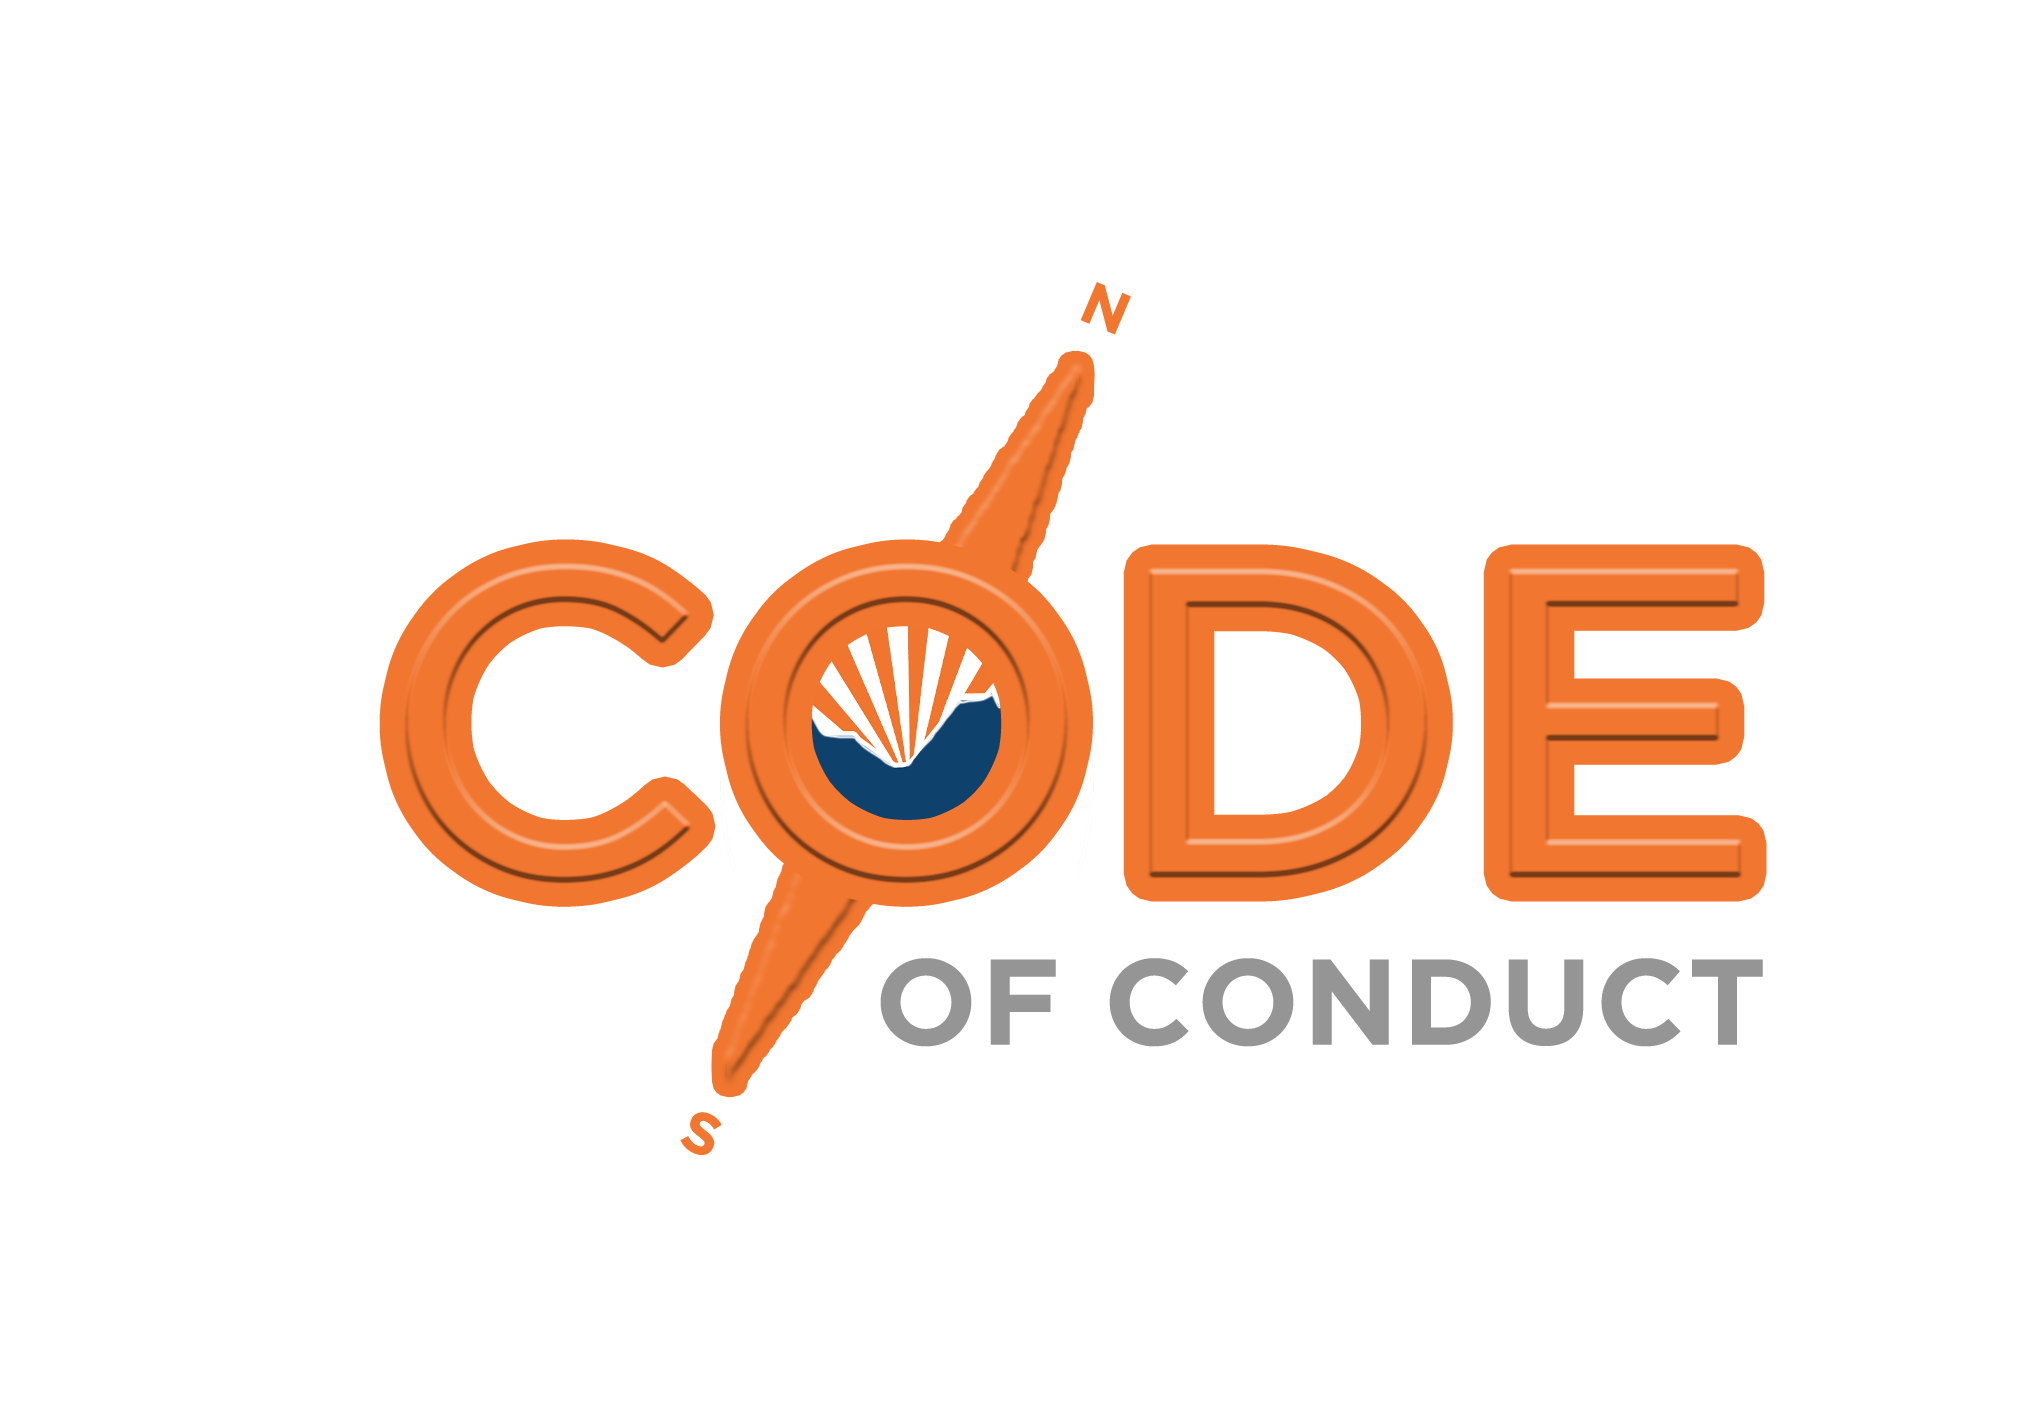 CODE OF CONDUCT